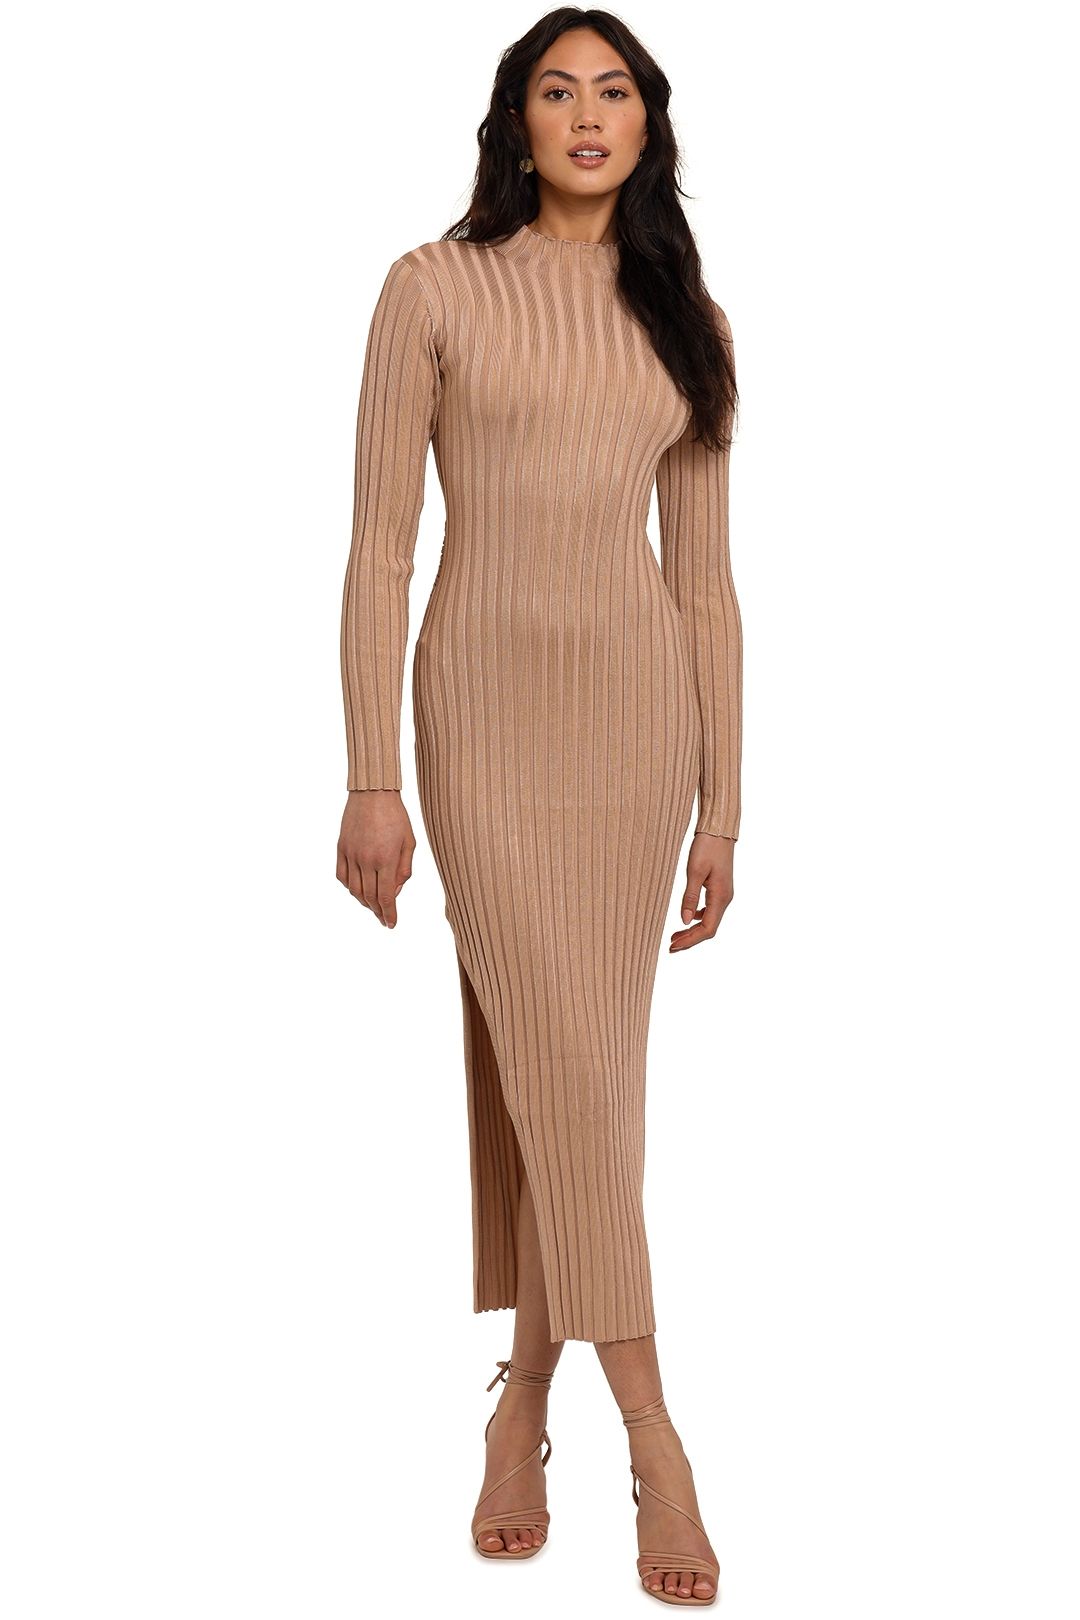 Significant Other Sylvia Knit Dress Champagne midi